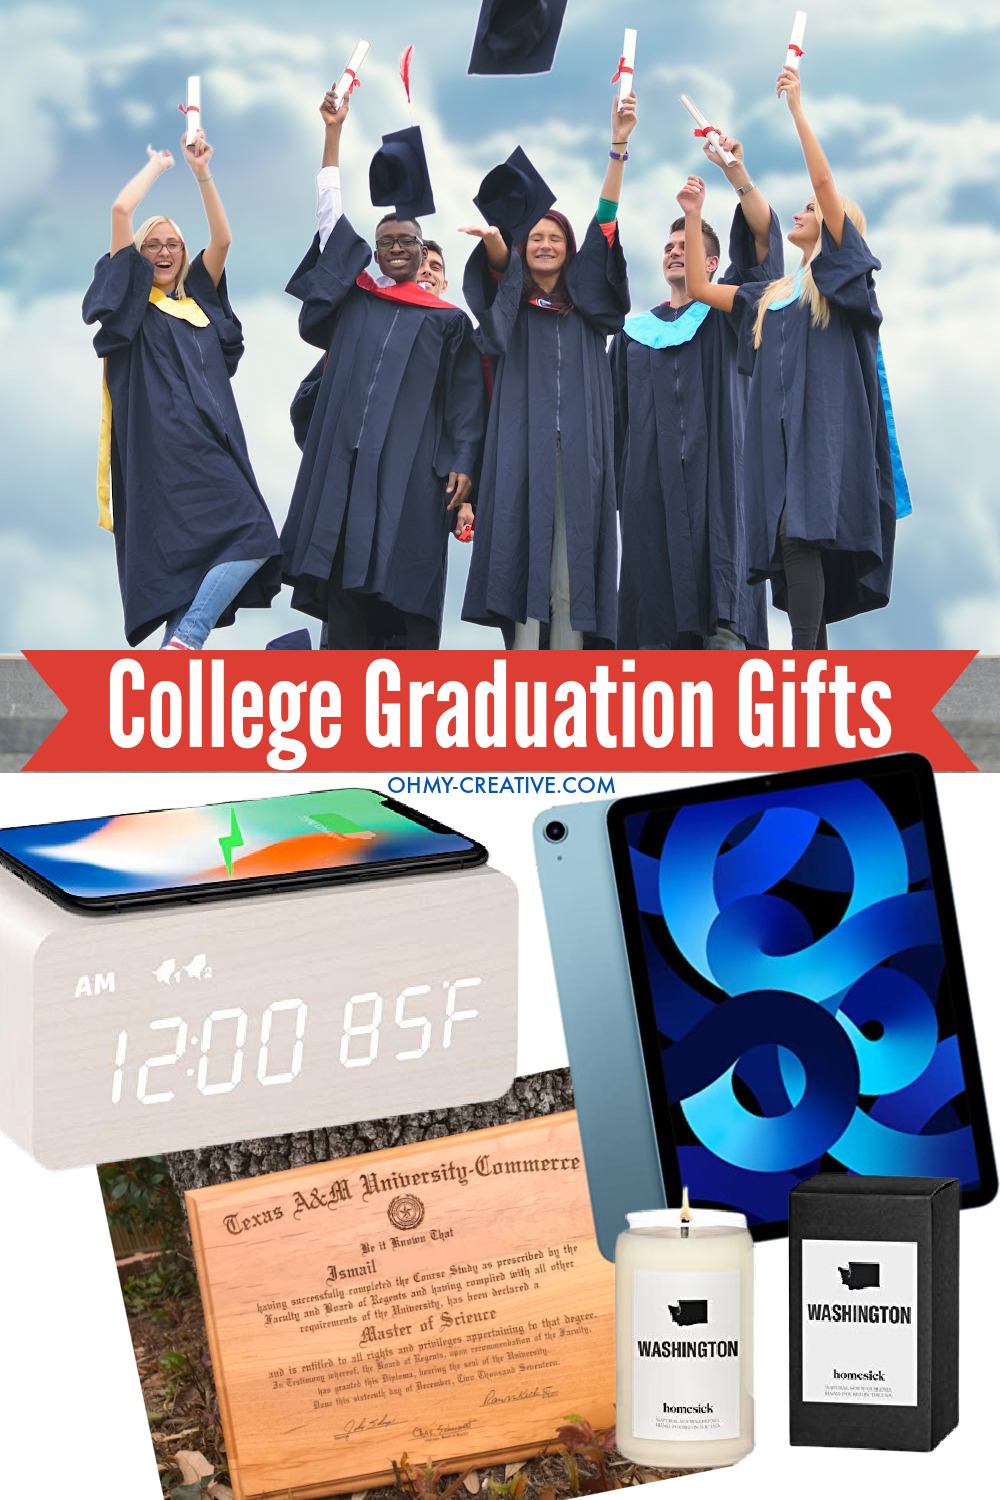 A group or grads celebrating and cheering. Below are great college graduation gift ideas to give!